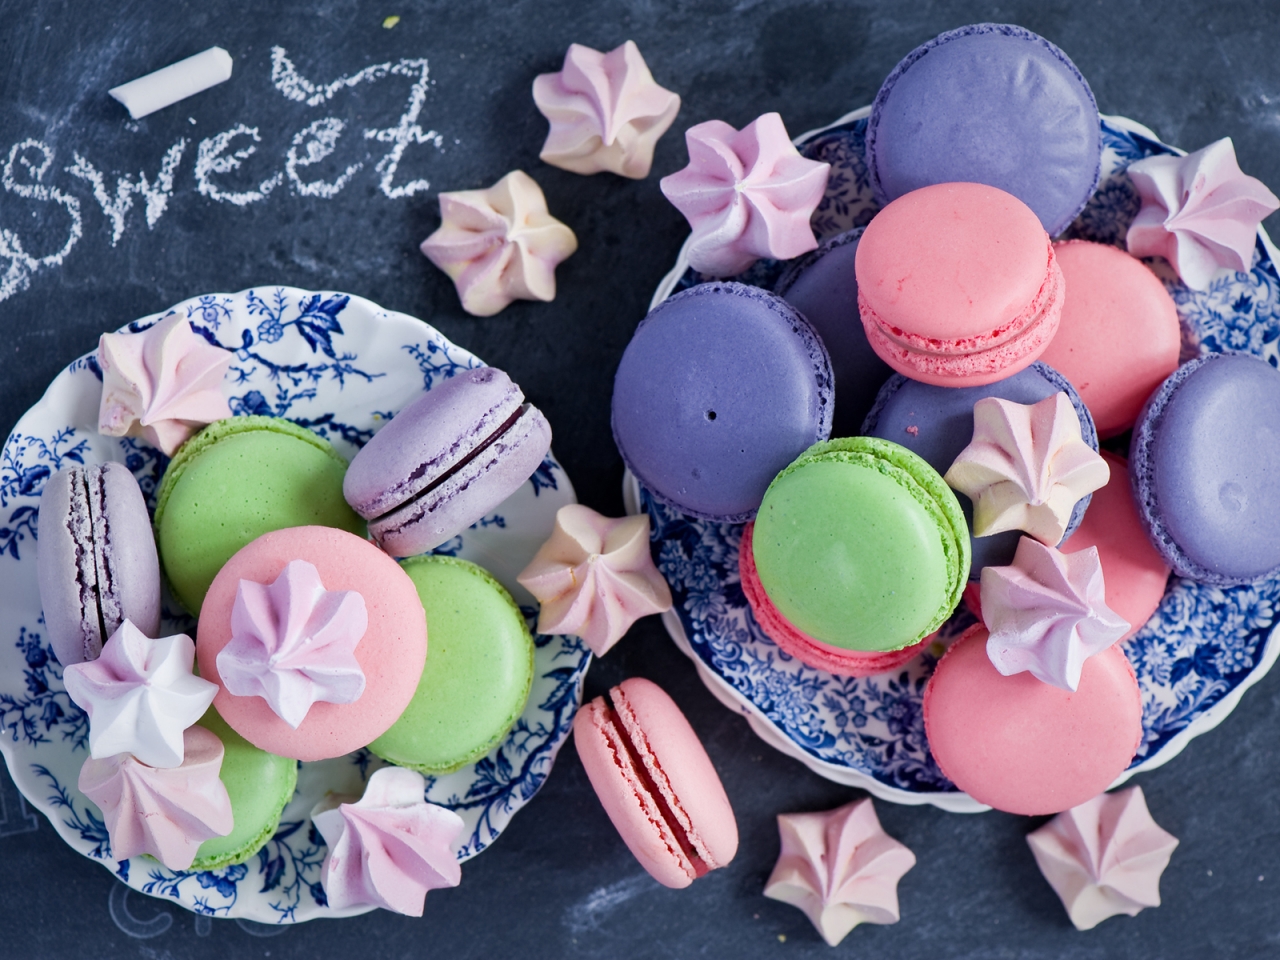 Macarons and Meringues for 1280 x 960 resolution